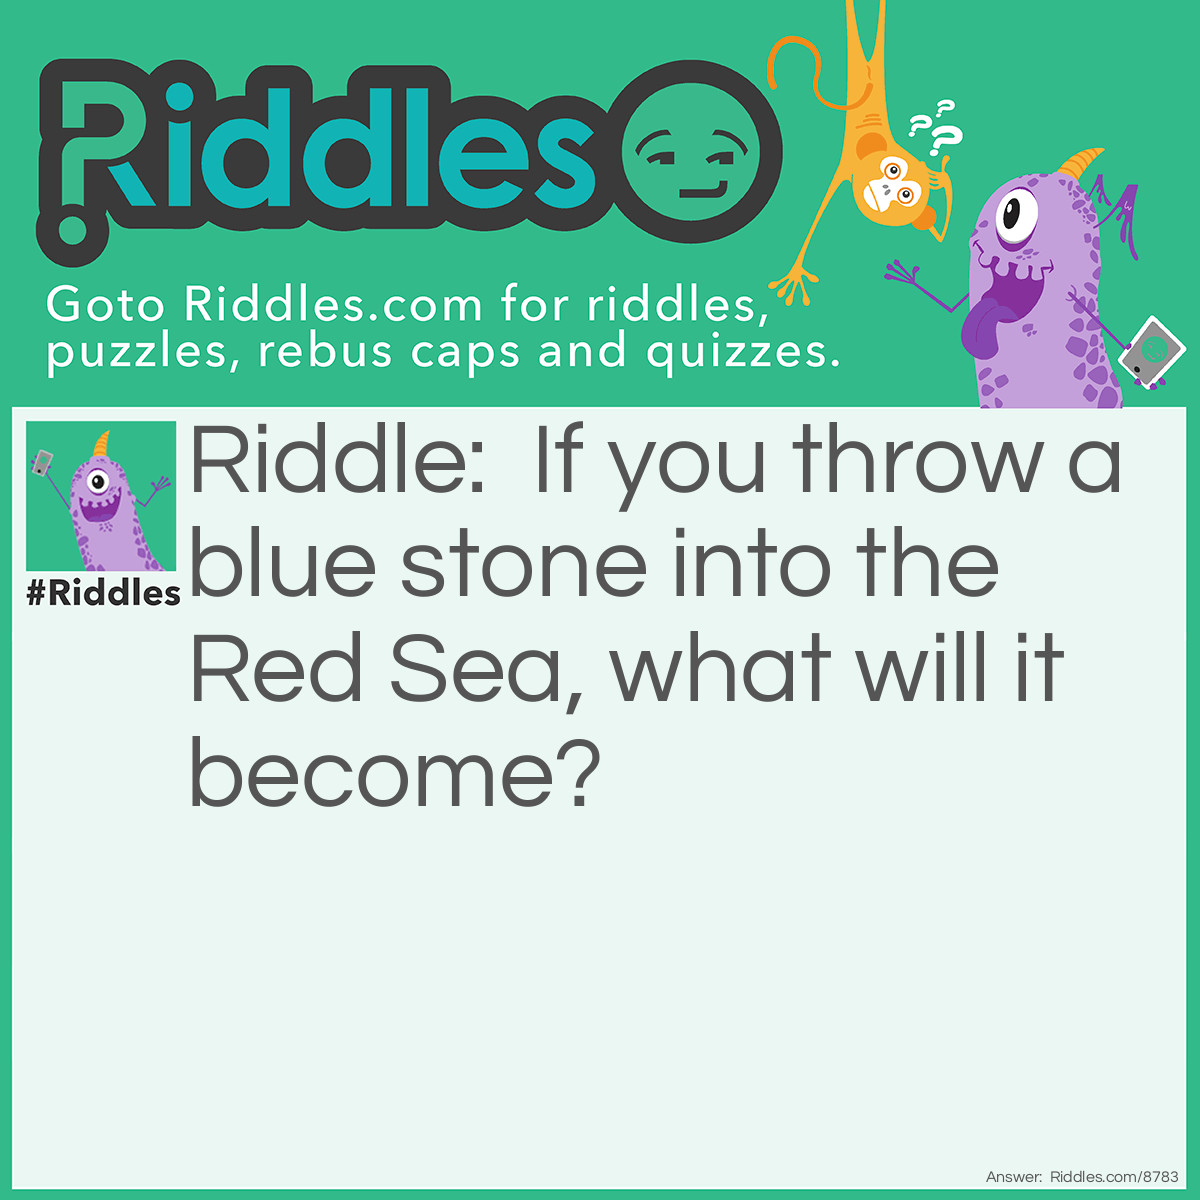 Riddle: If you throw a blue stone into the Red Sea, what will it become? Answer: WET!!! Tell me you got this.